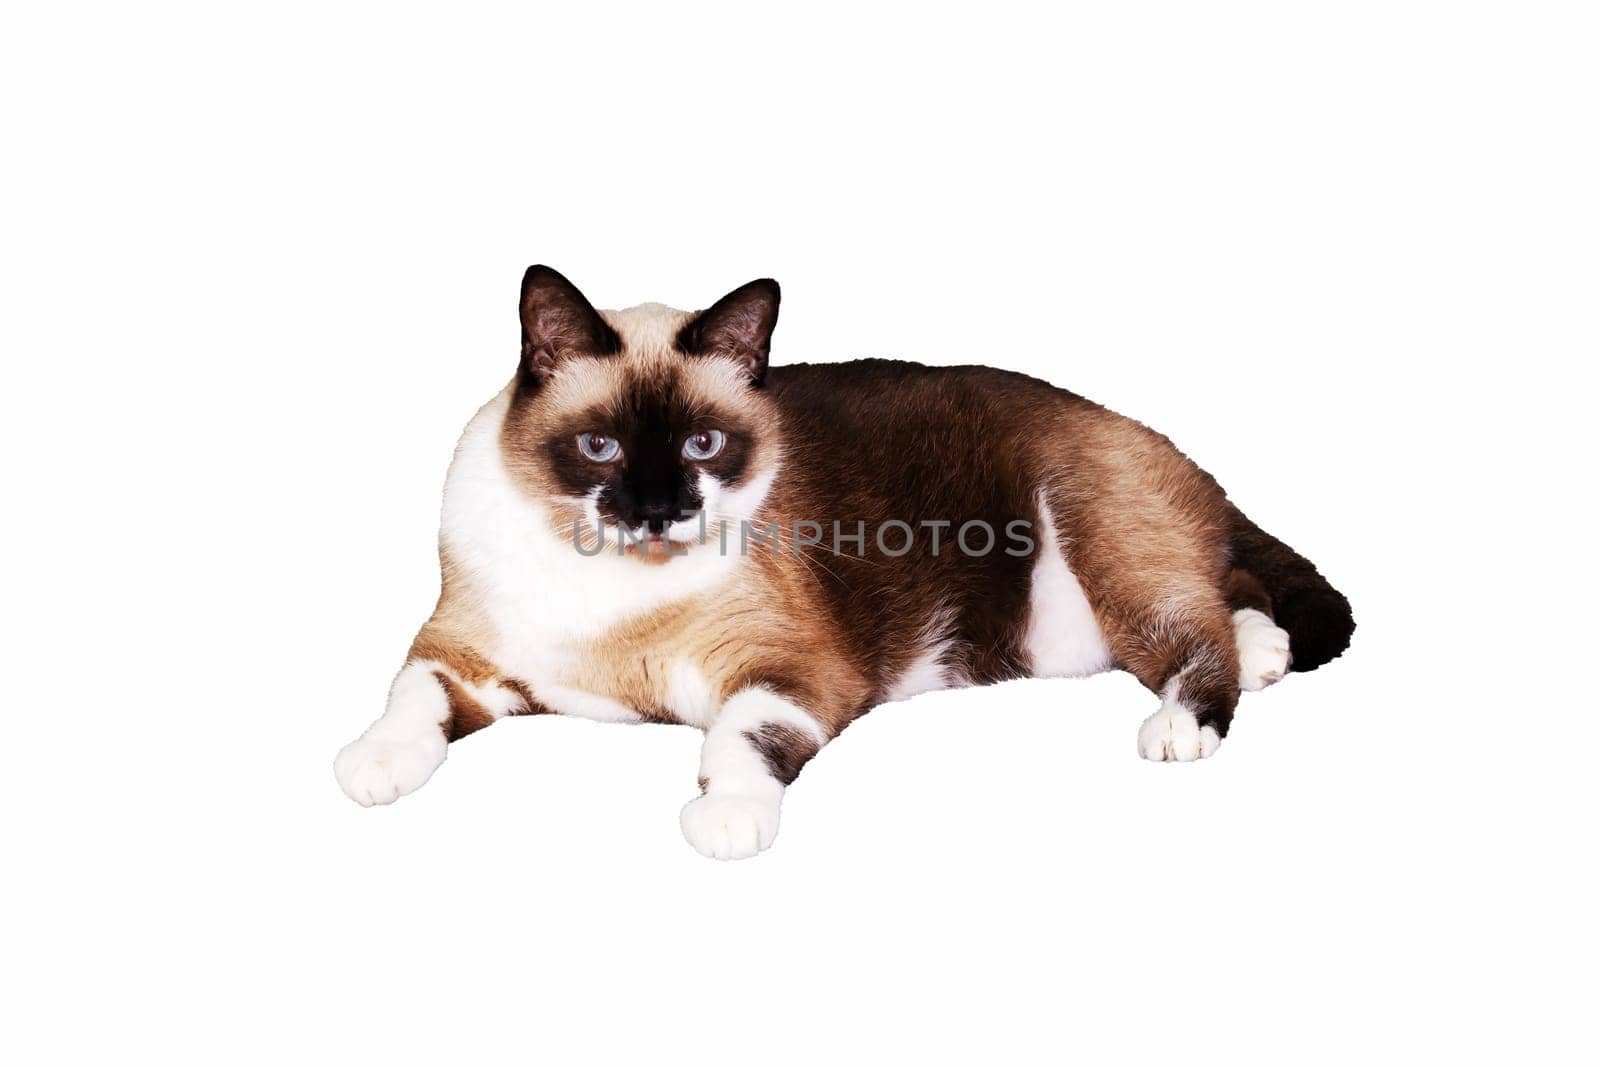 Gray cat with blue eyes isolated on white background by Vera1703